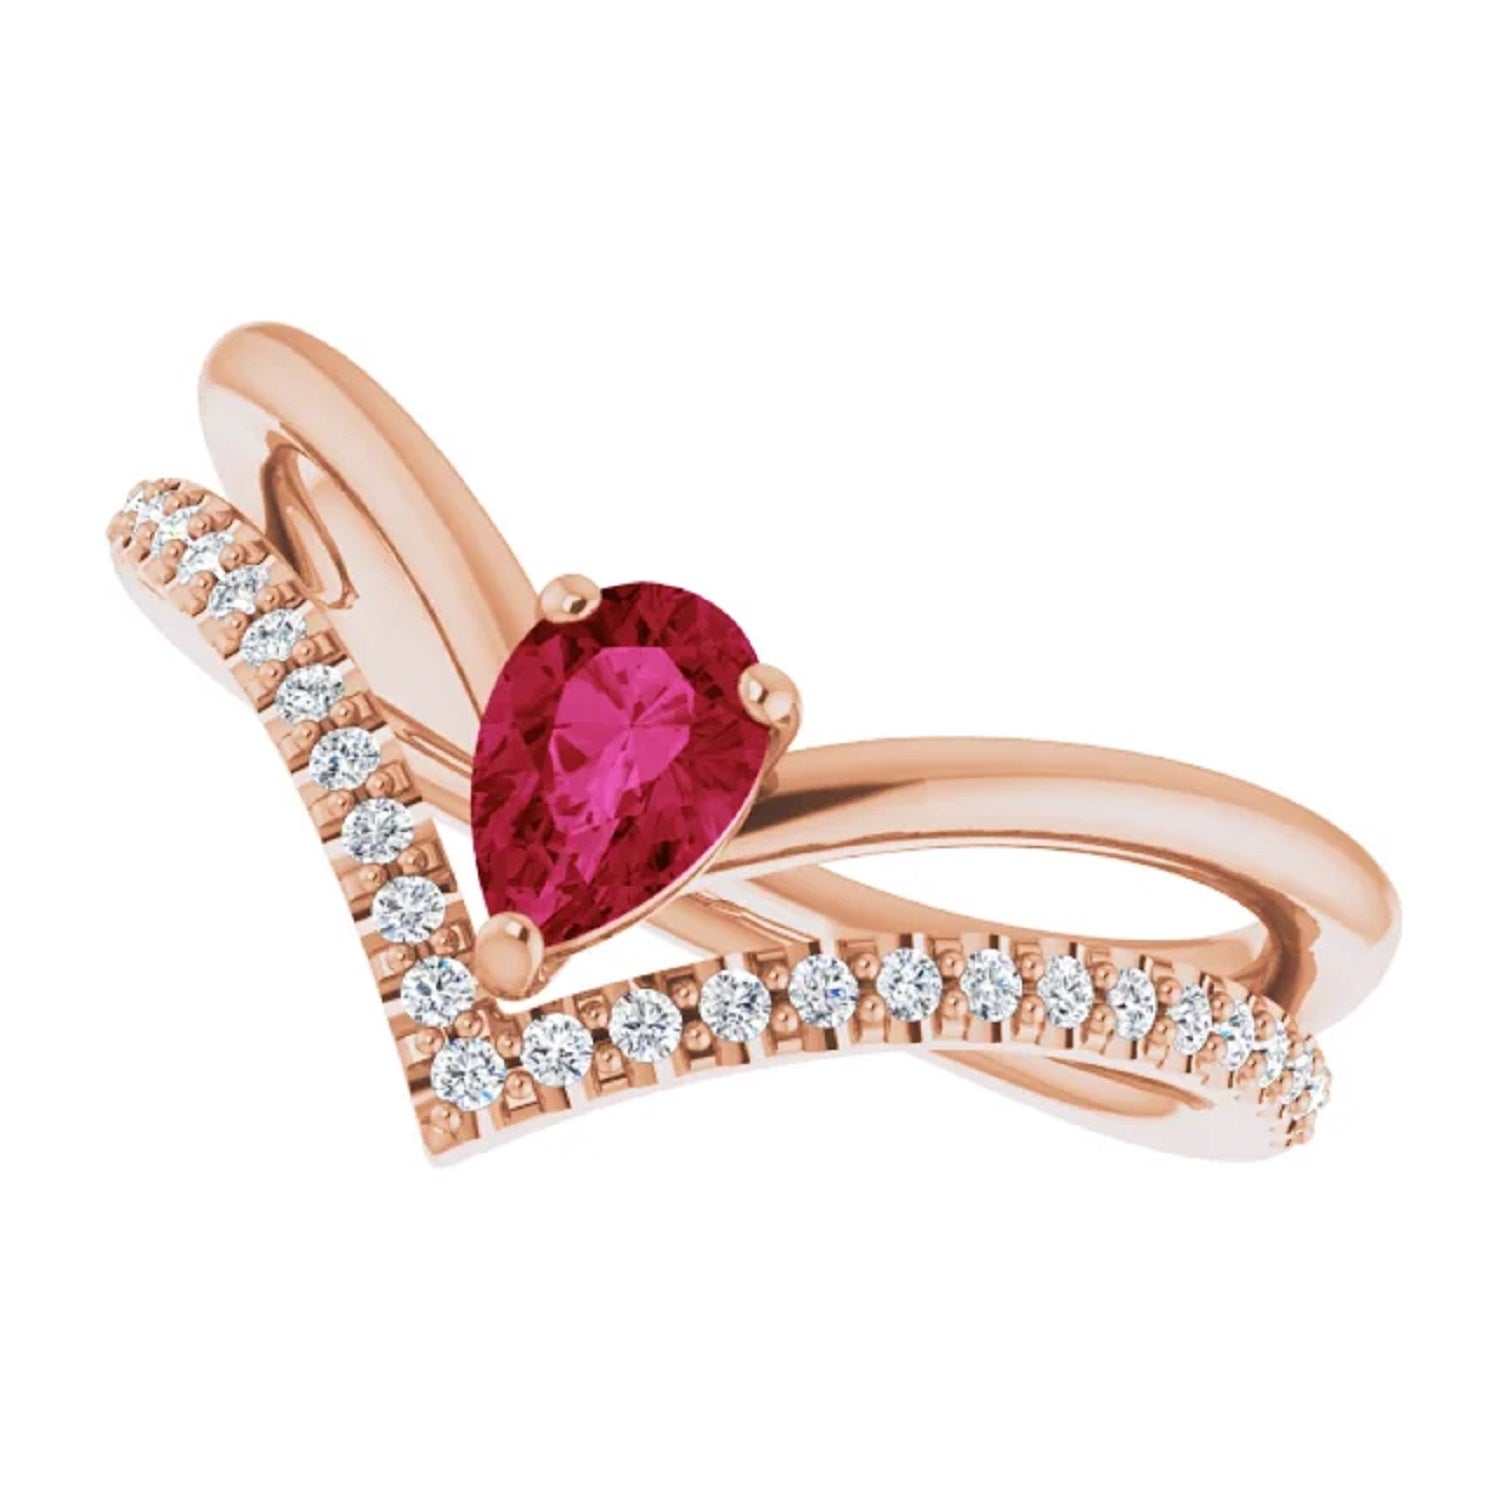 2.5ct Oval Pink Ruby Ring Simulated Diamond Halo Solitaire Rose Gold Plated  | eBay